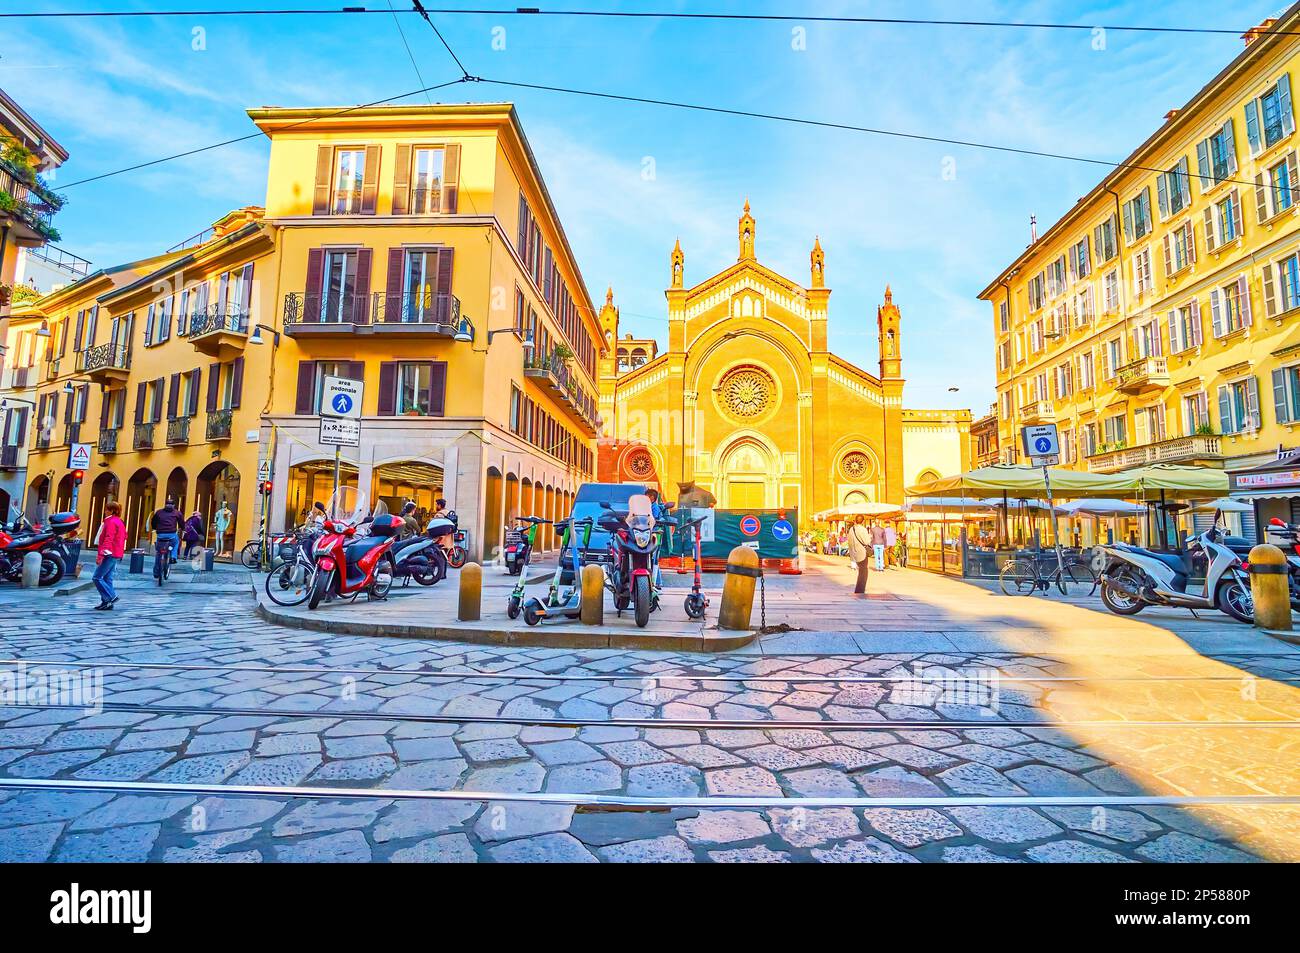 MILAN, ITALY - APRIL 11, 2022: Piazza del Carmine in Brera district with restaurants, taverns and outdoor dining places, on April 11 in Milan, Italy Stock Photo